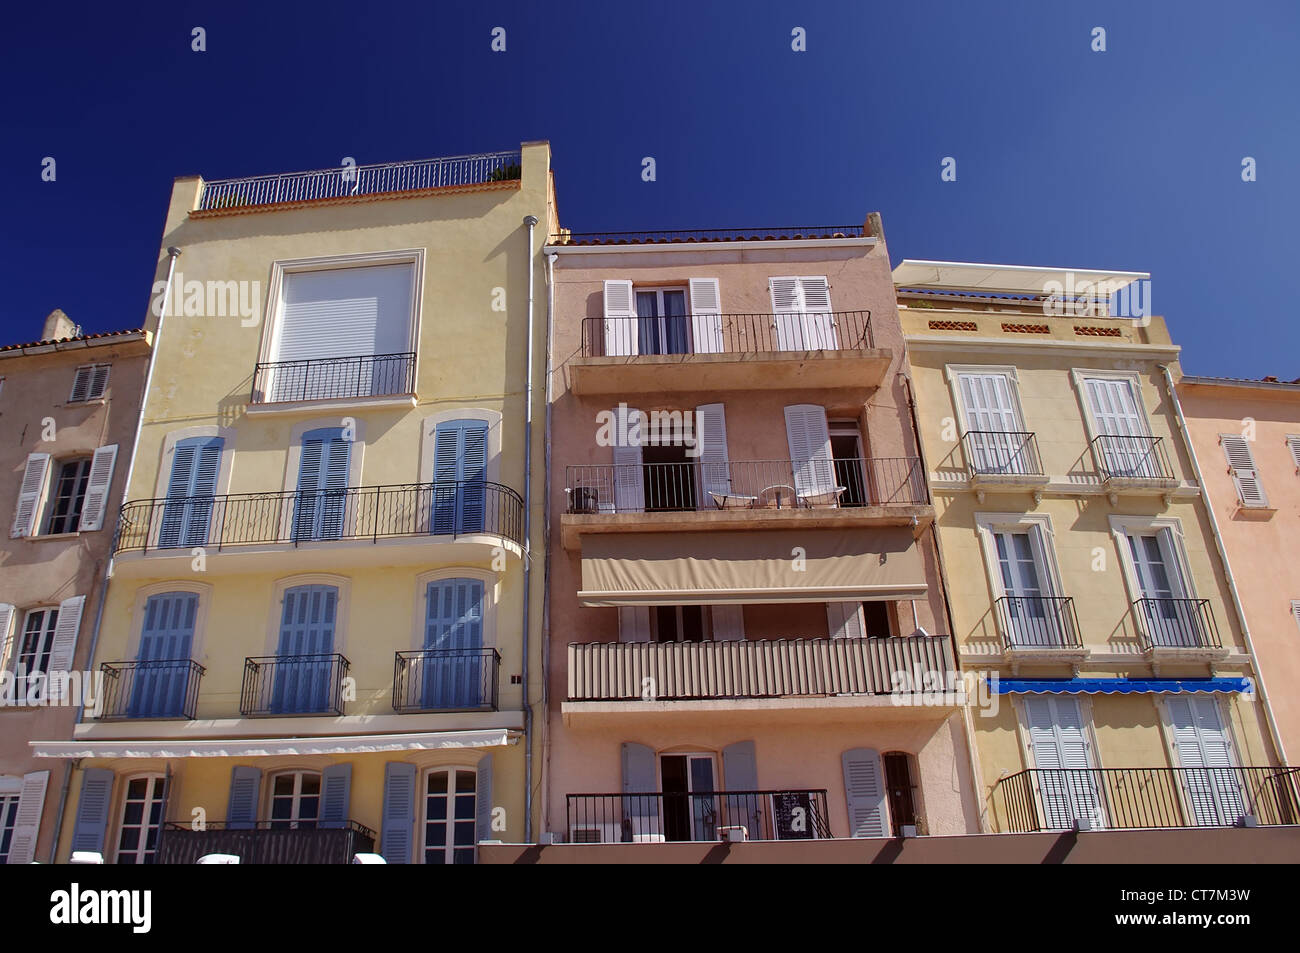 traditional houses in Saint Tropez, France Stock Photo